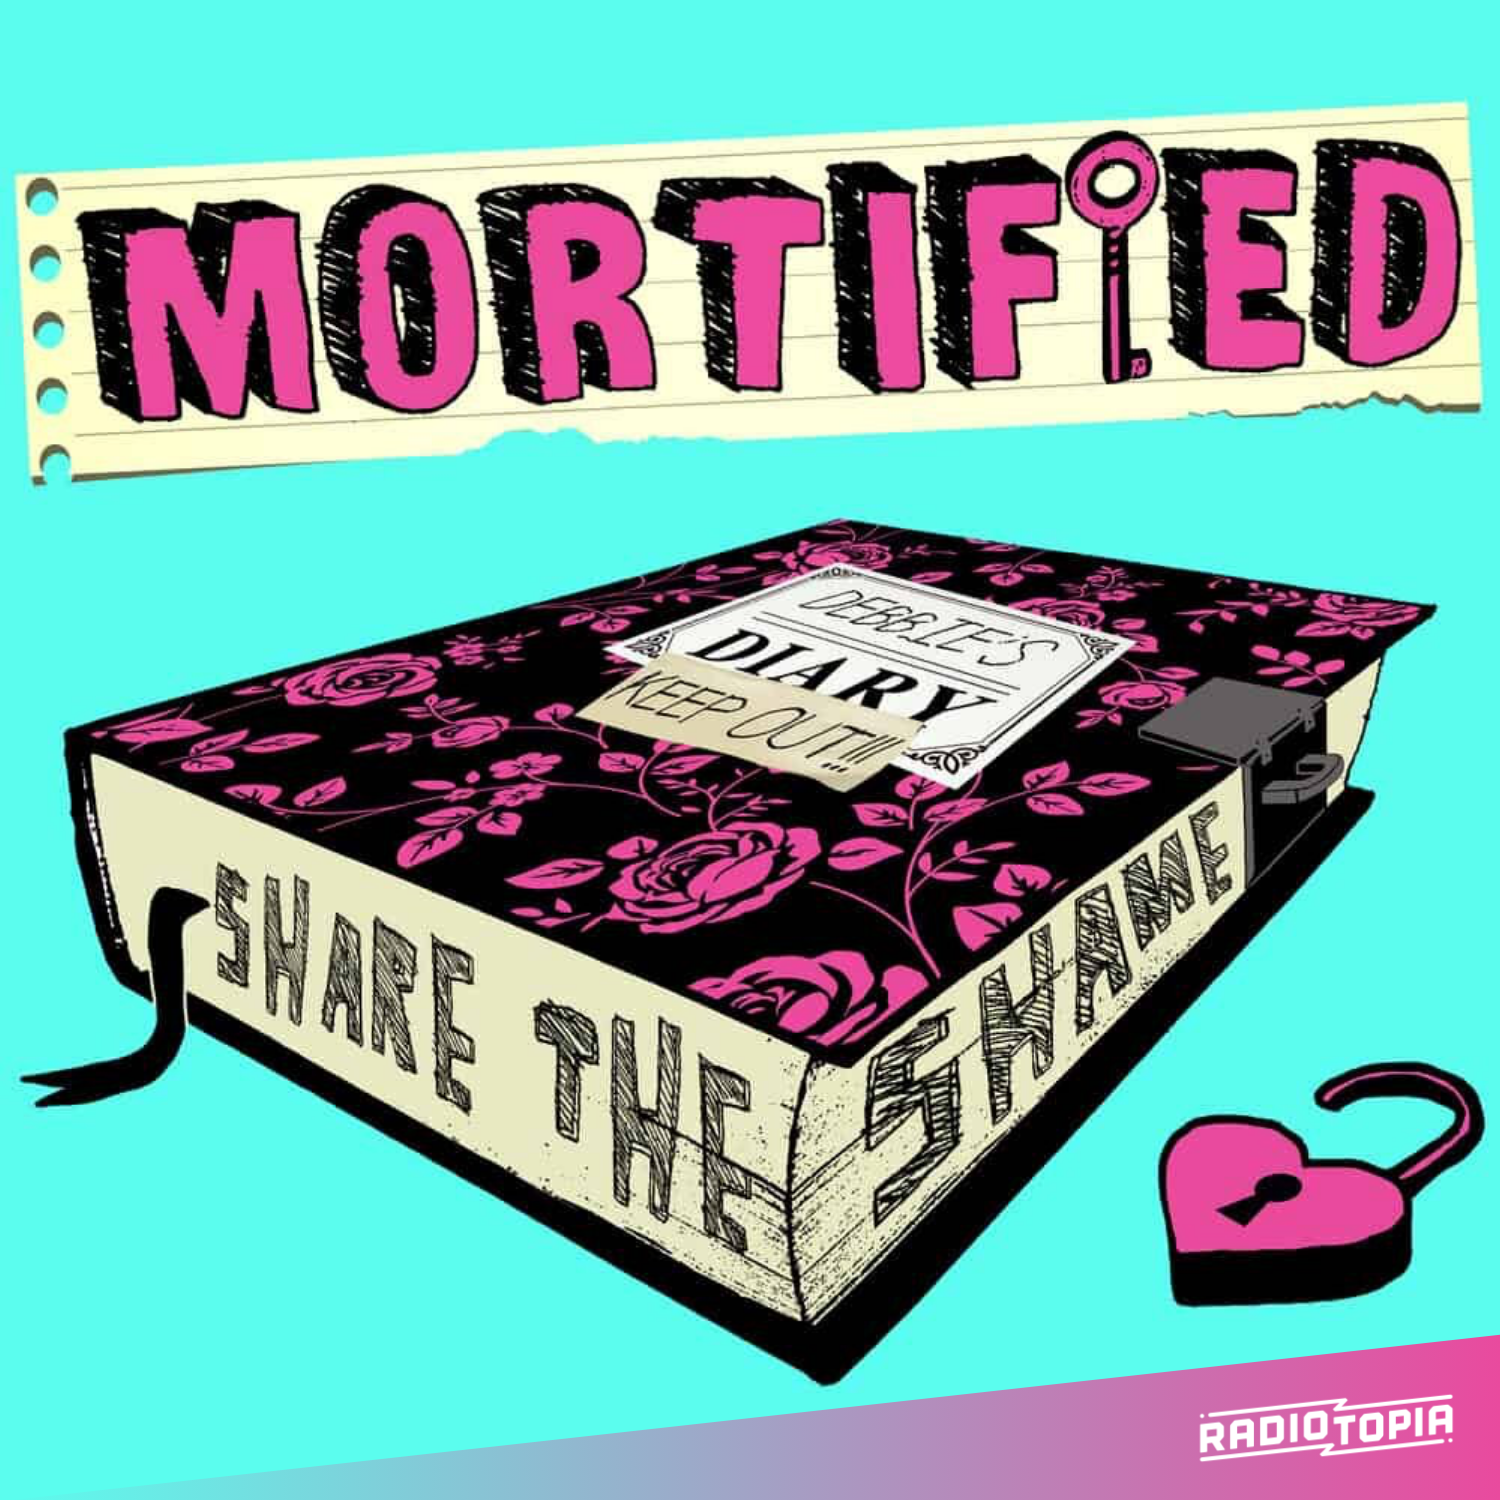 The Mortified Podcast â€“ Mortified: Share the Shame